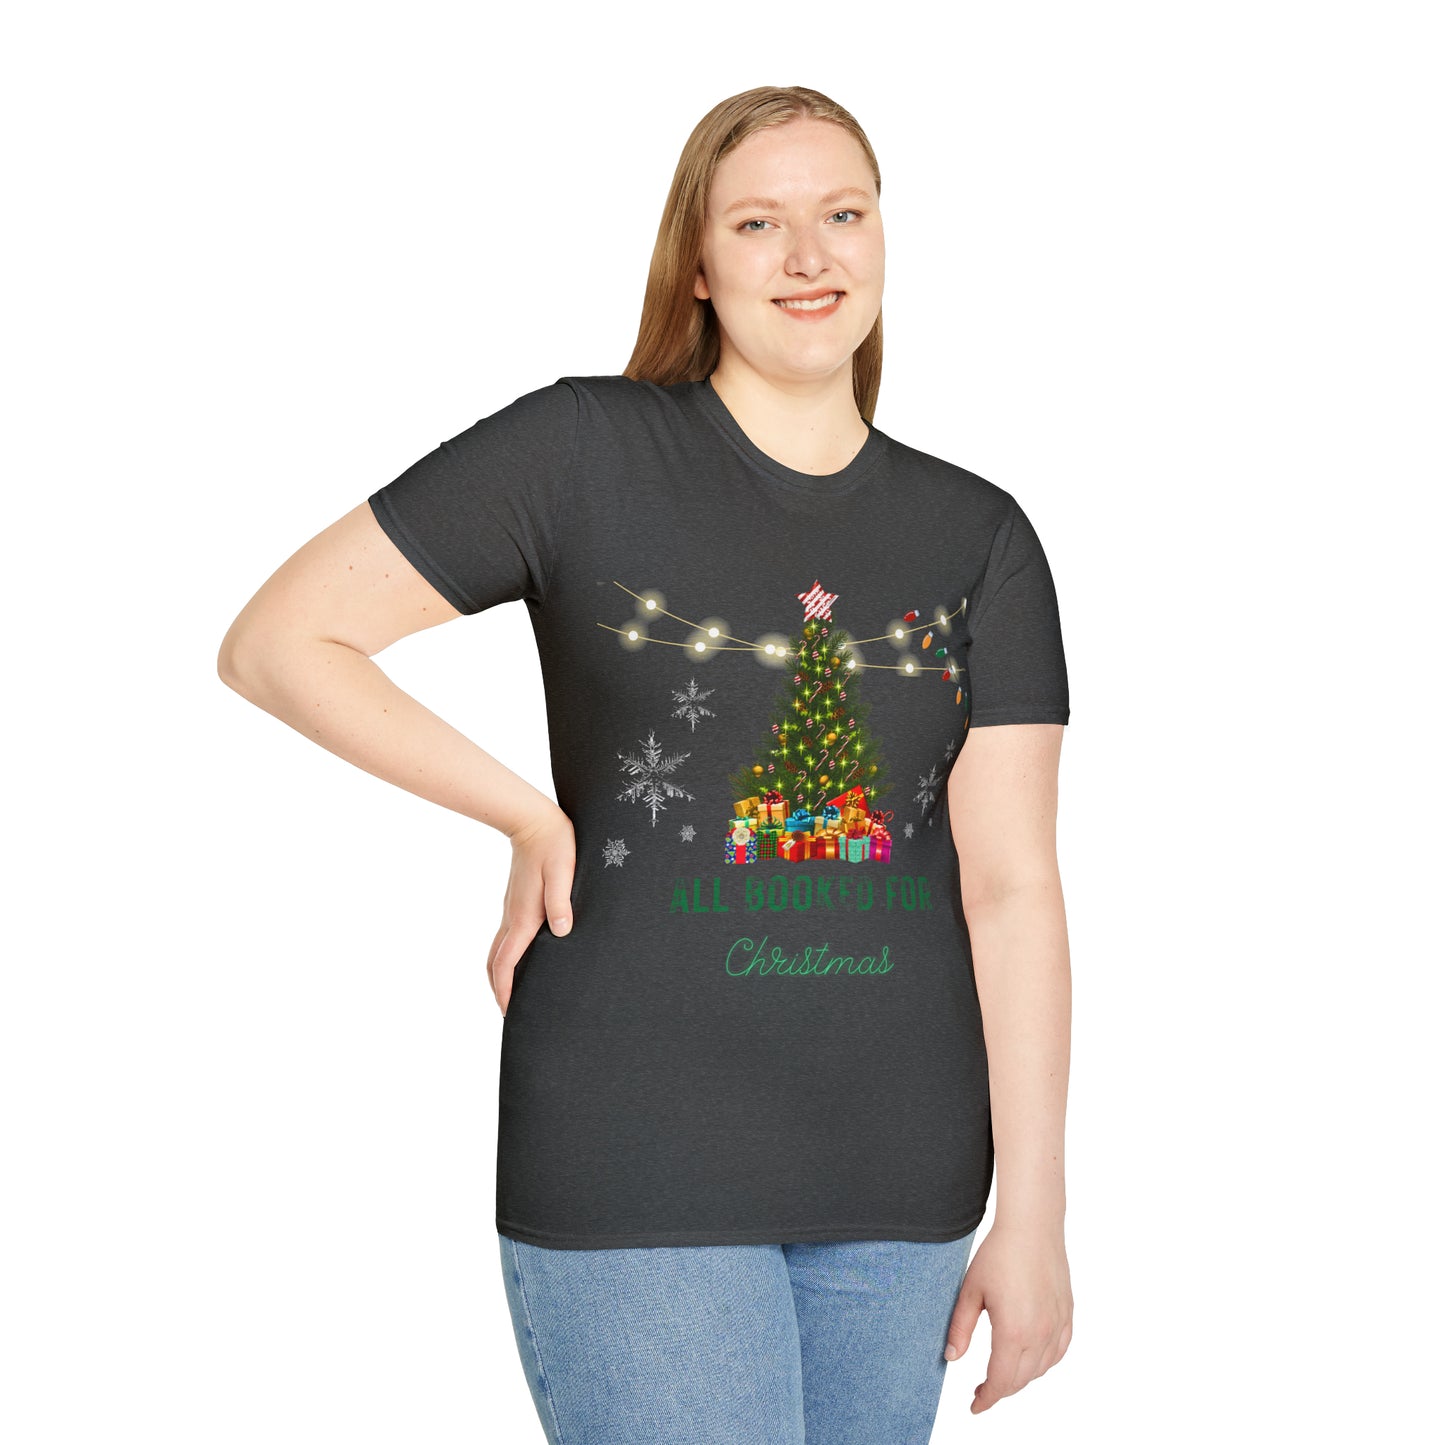 All booked for Christmas - Unisex Softstyle T-Shirt